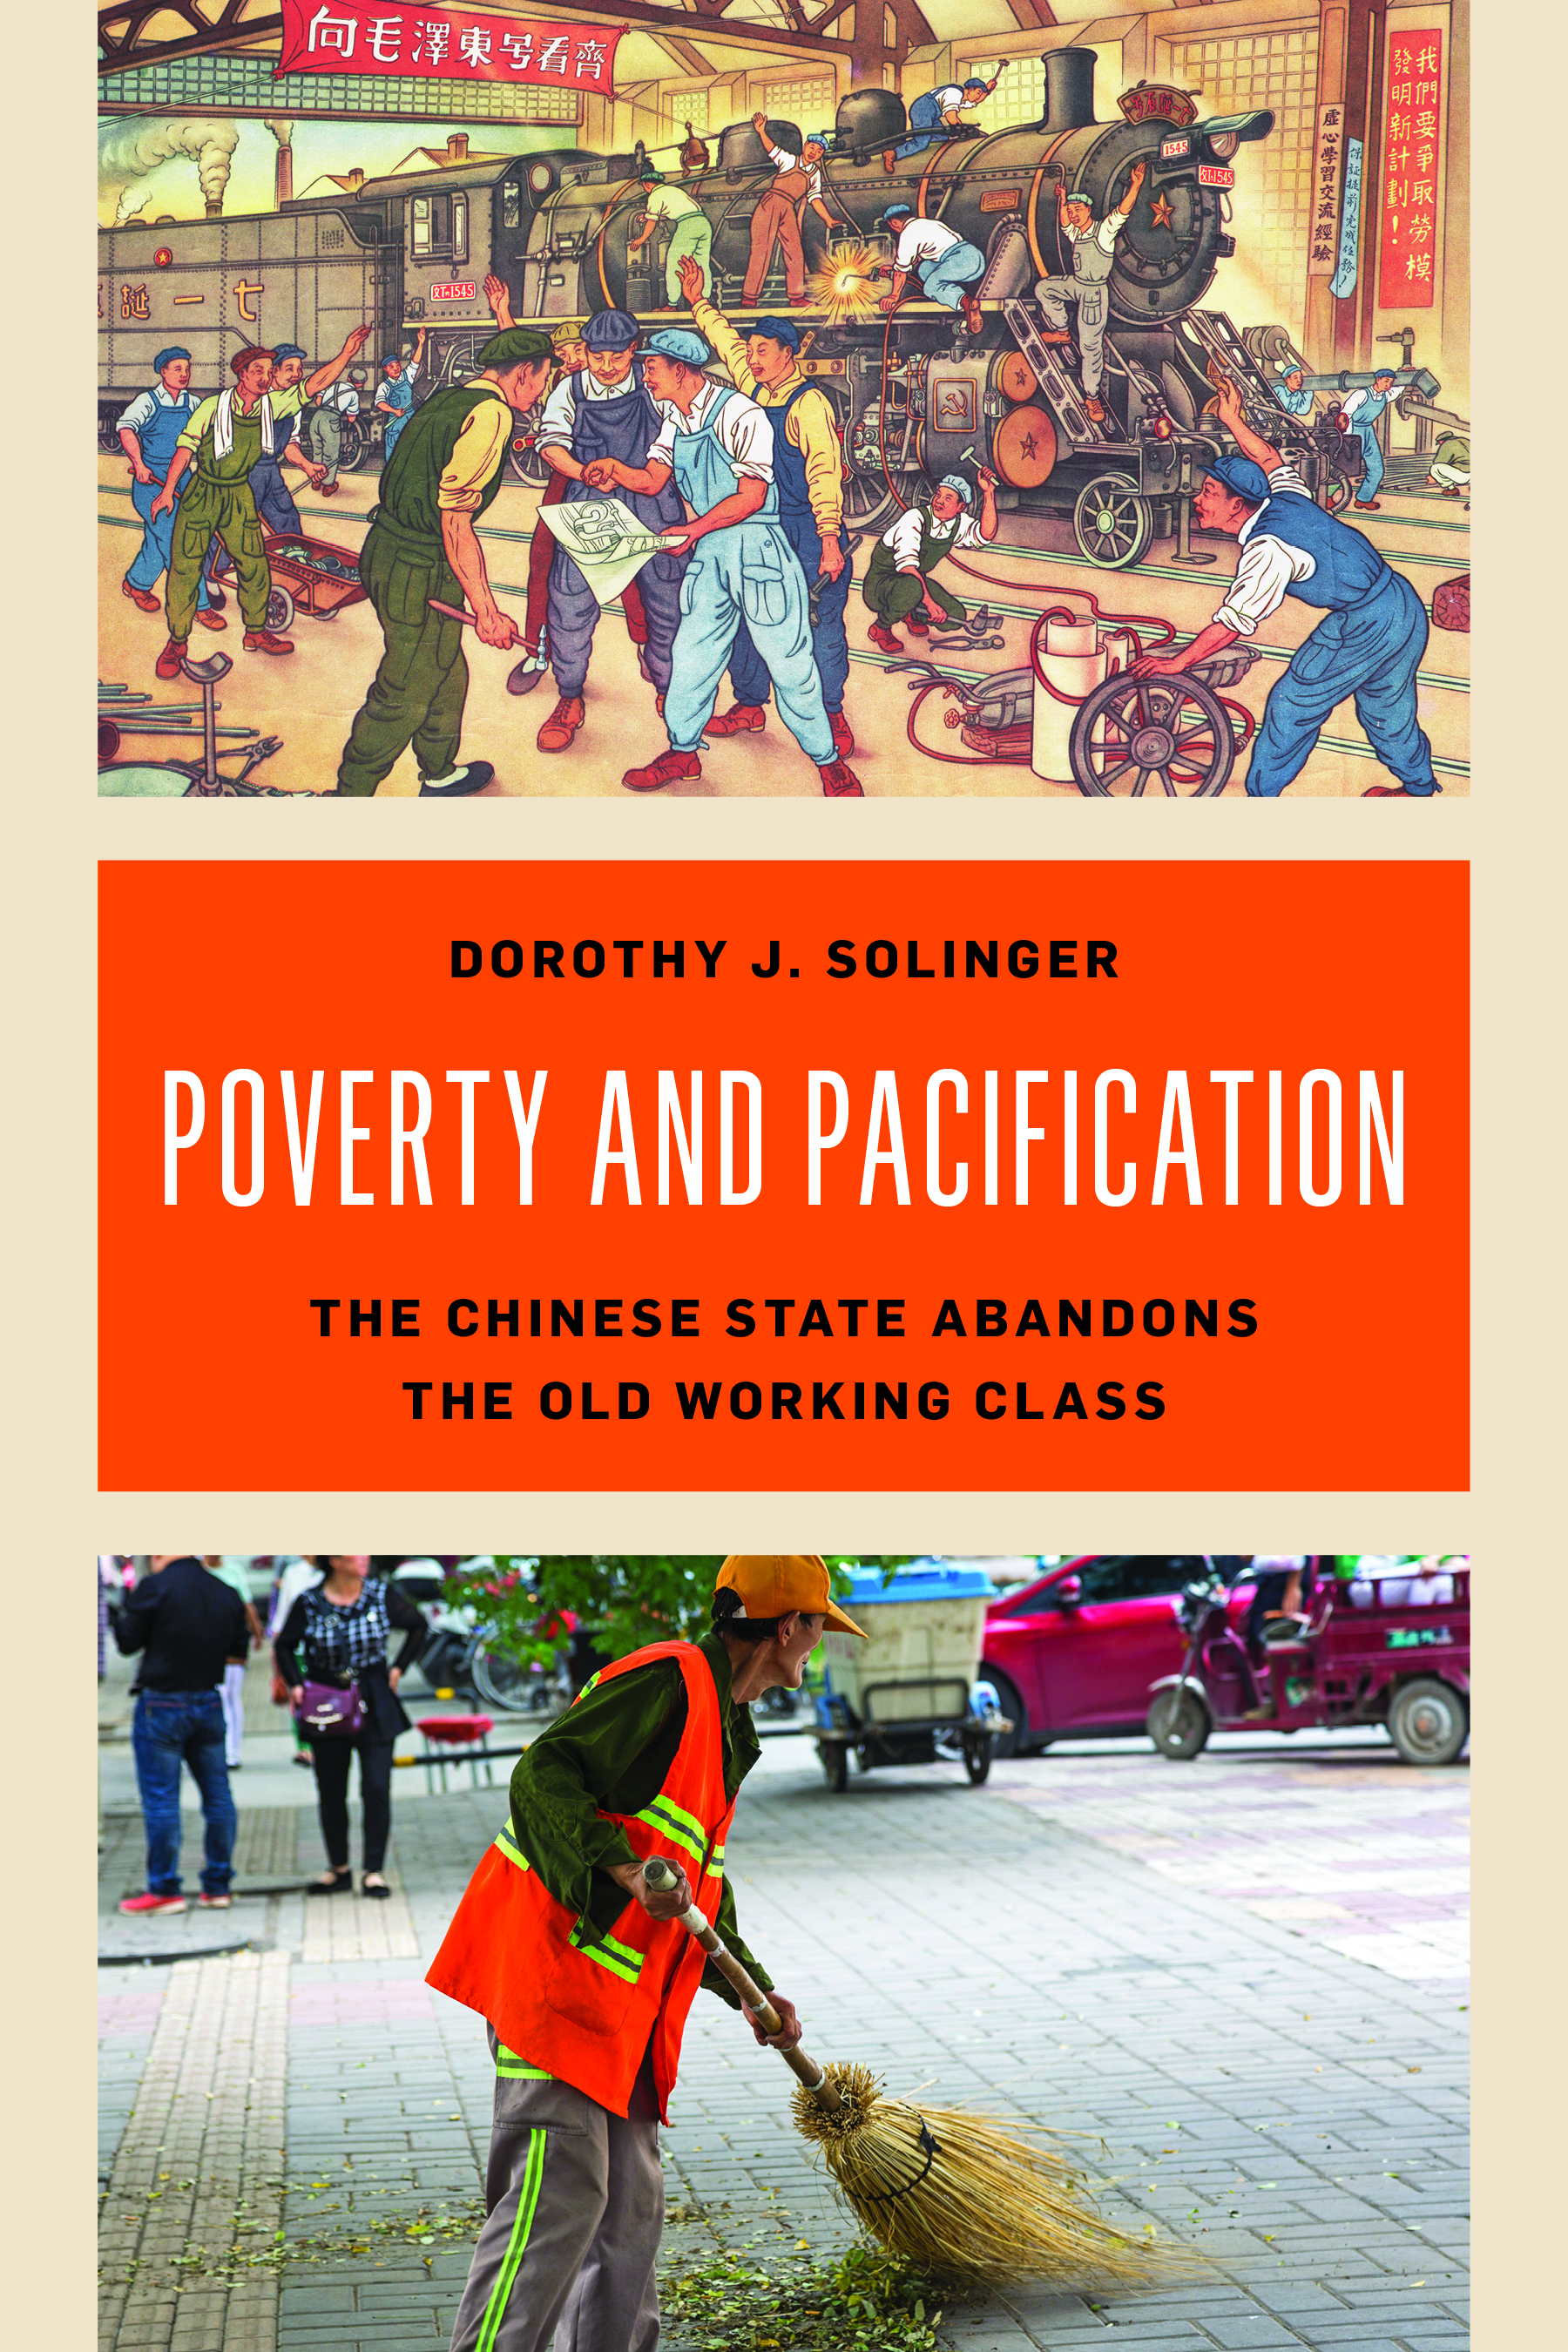 Poverty and Pacification: The Chinese State Abandons the Old Working Class